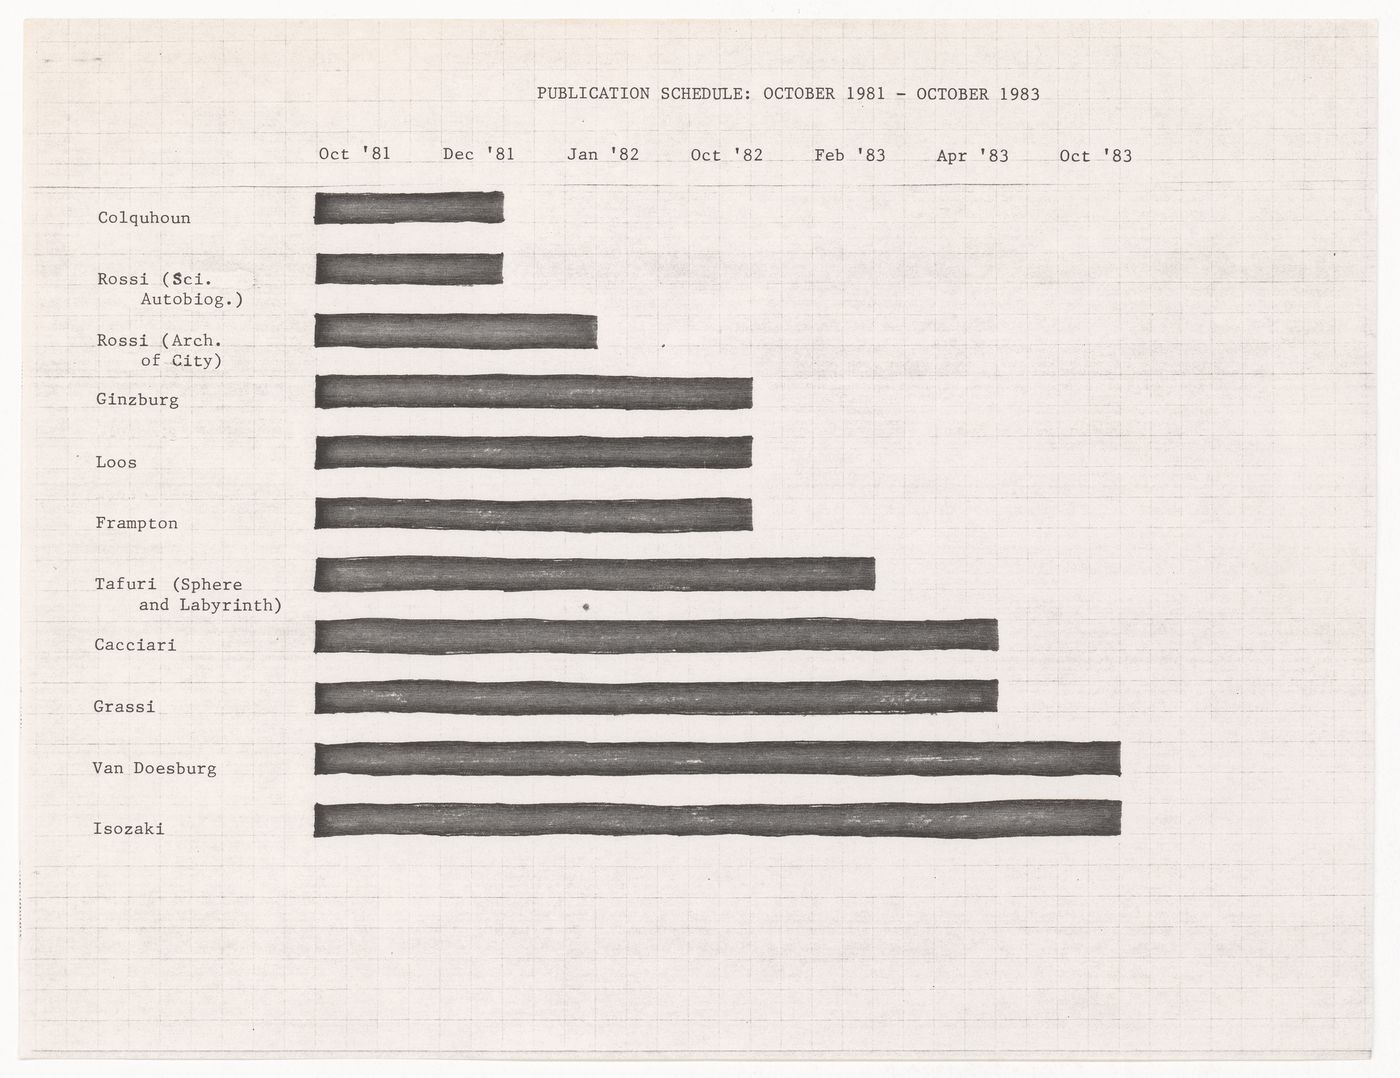 Publication schedule October 1981- October 1983 for Oppositions Books